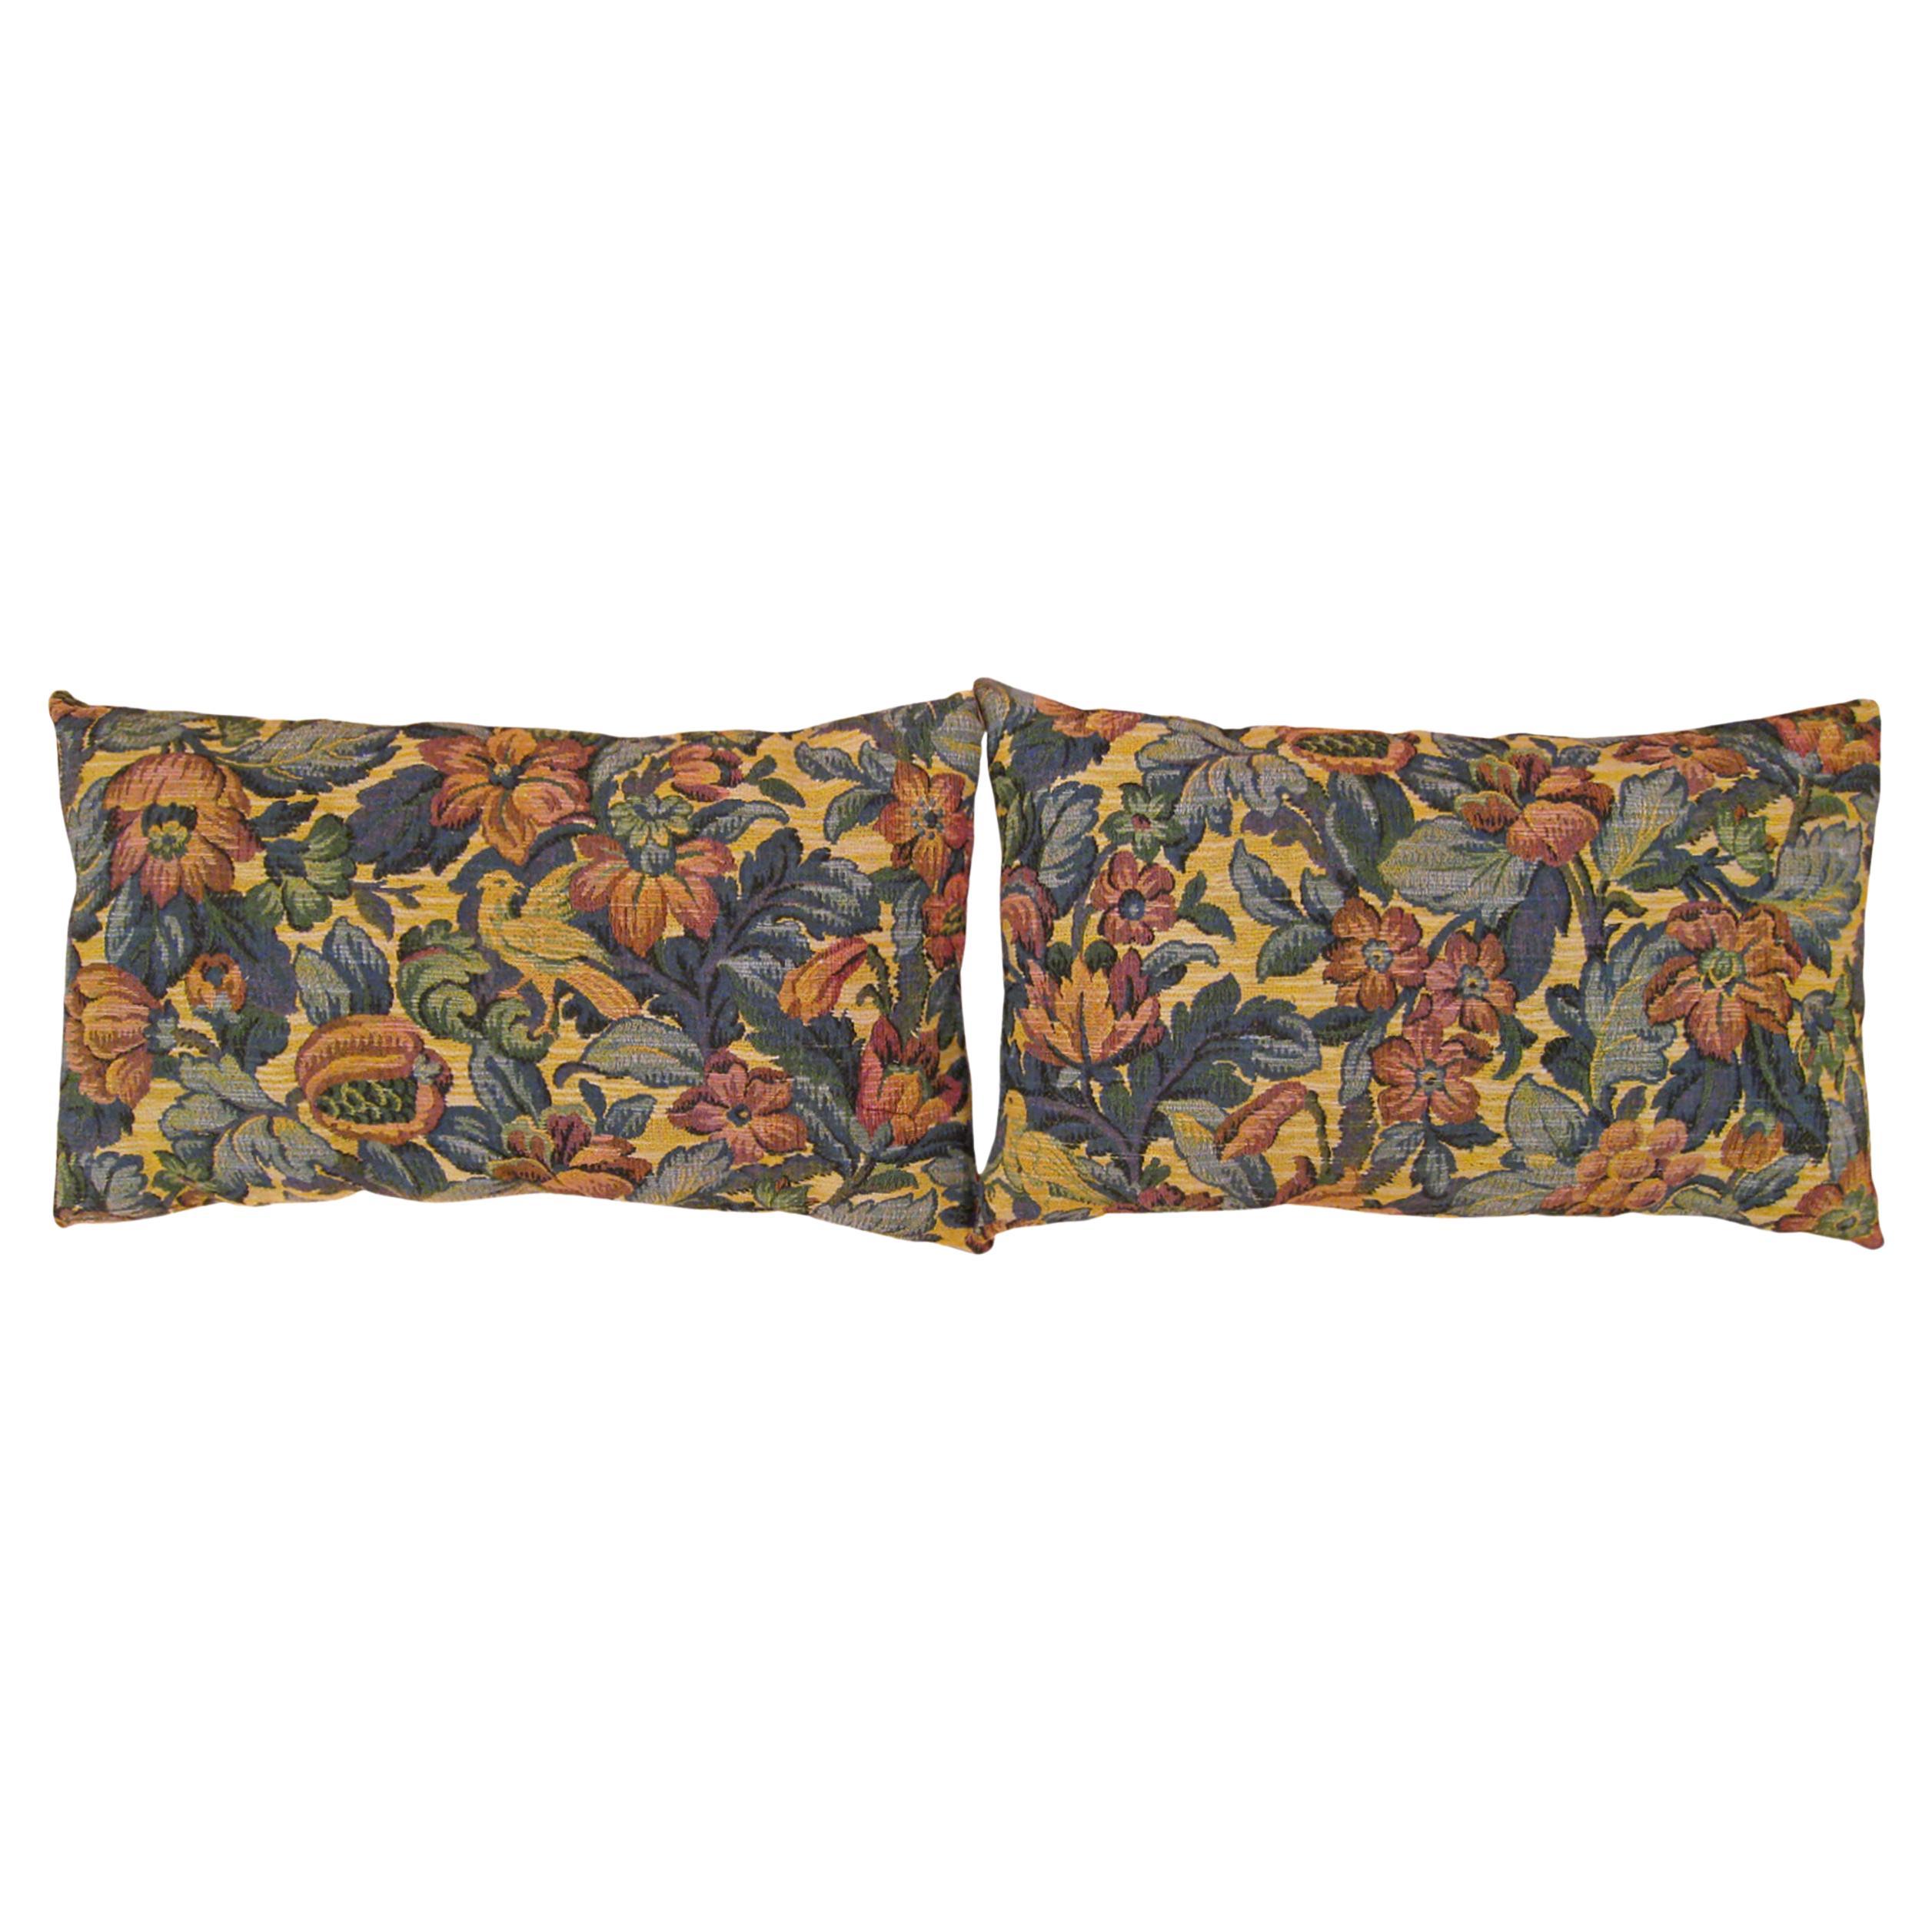 Pair of Decorative Antique Jacquard Tapestry Pillows with Floral Elements For Sale